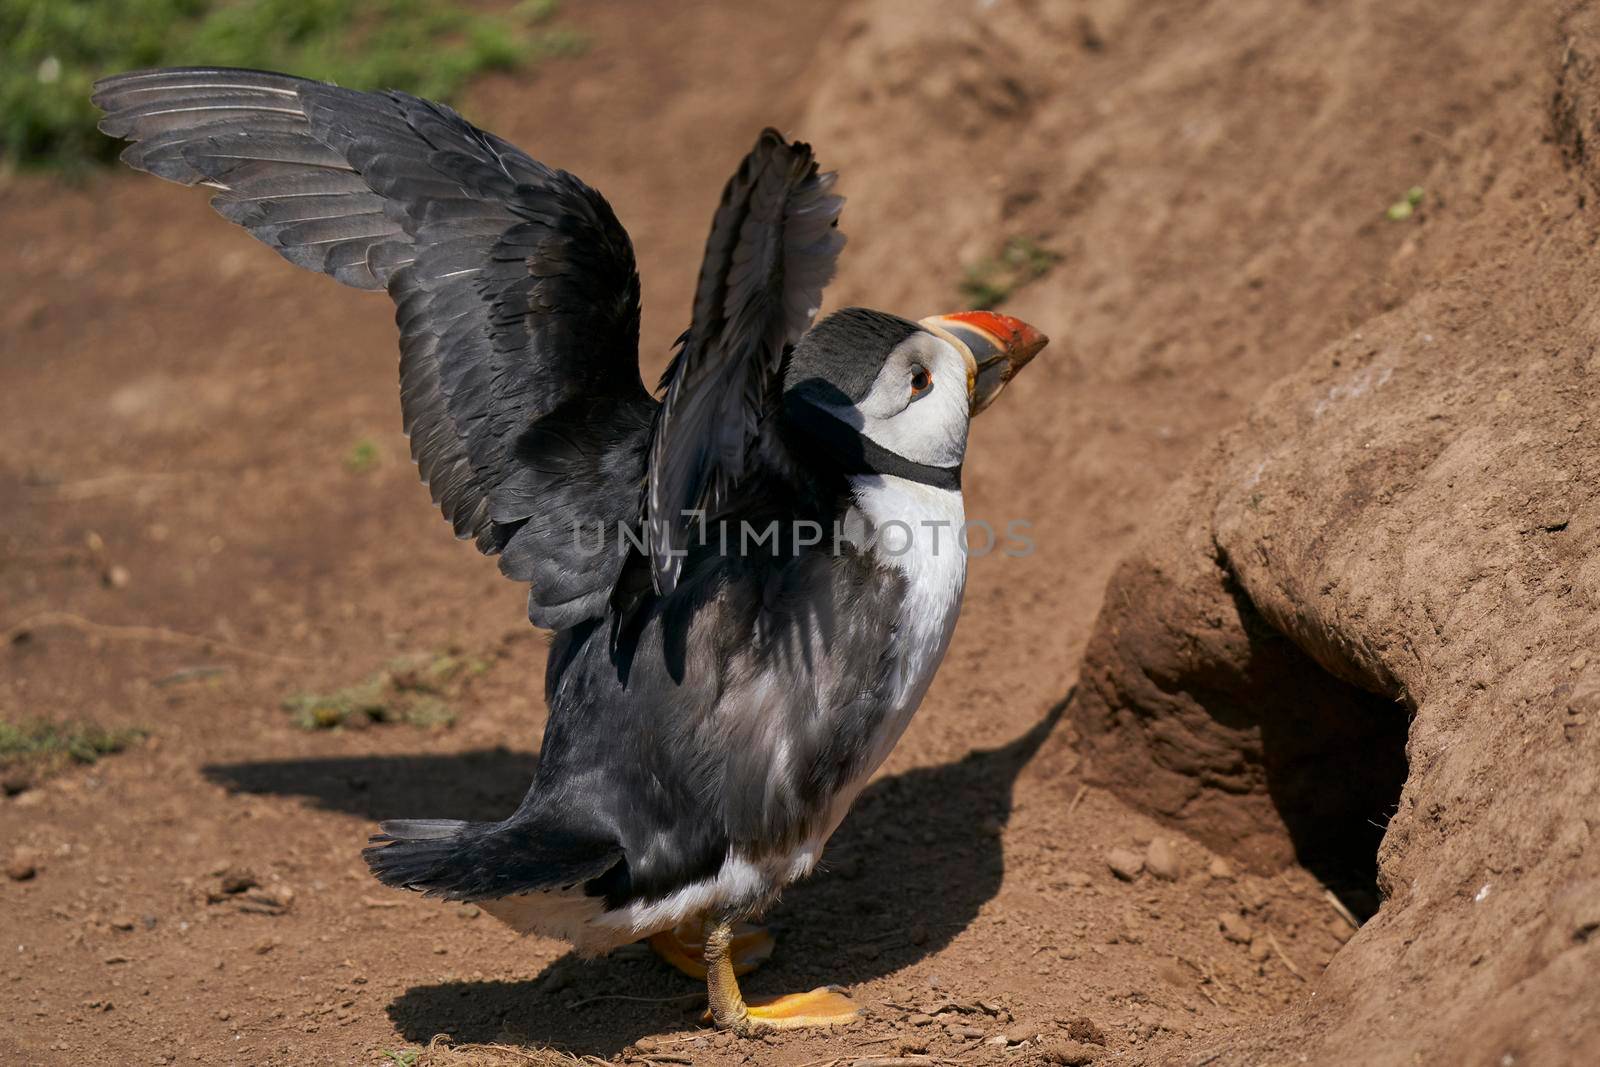 Puffin at nesting burrow by JeremyRichards